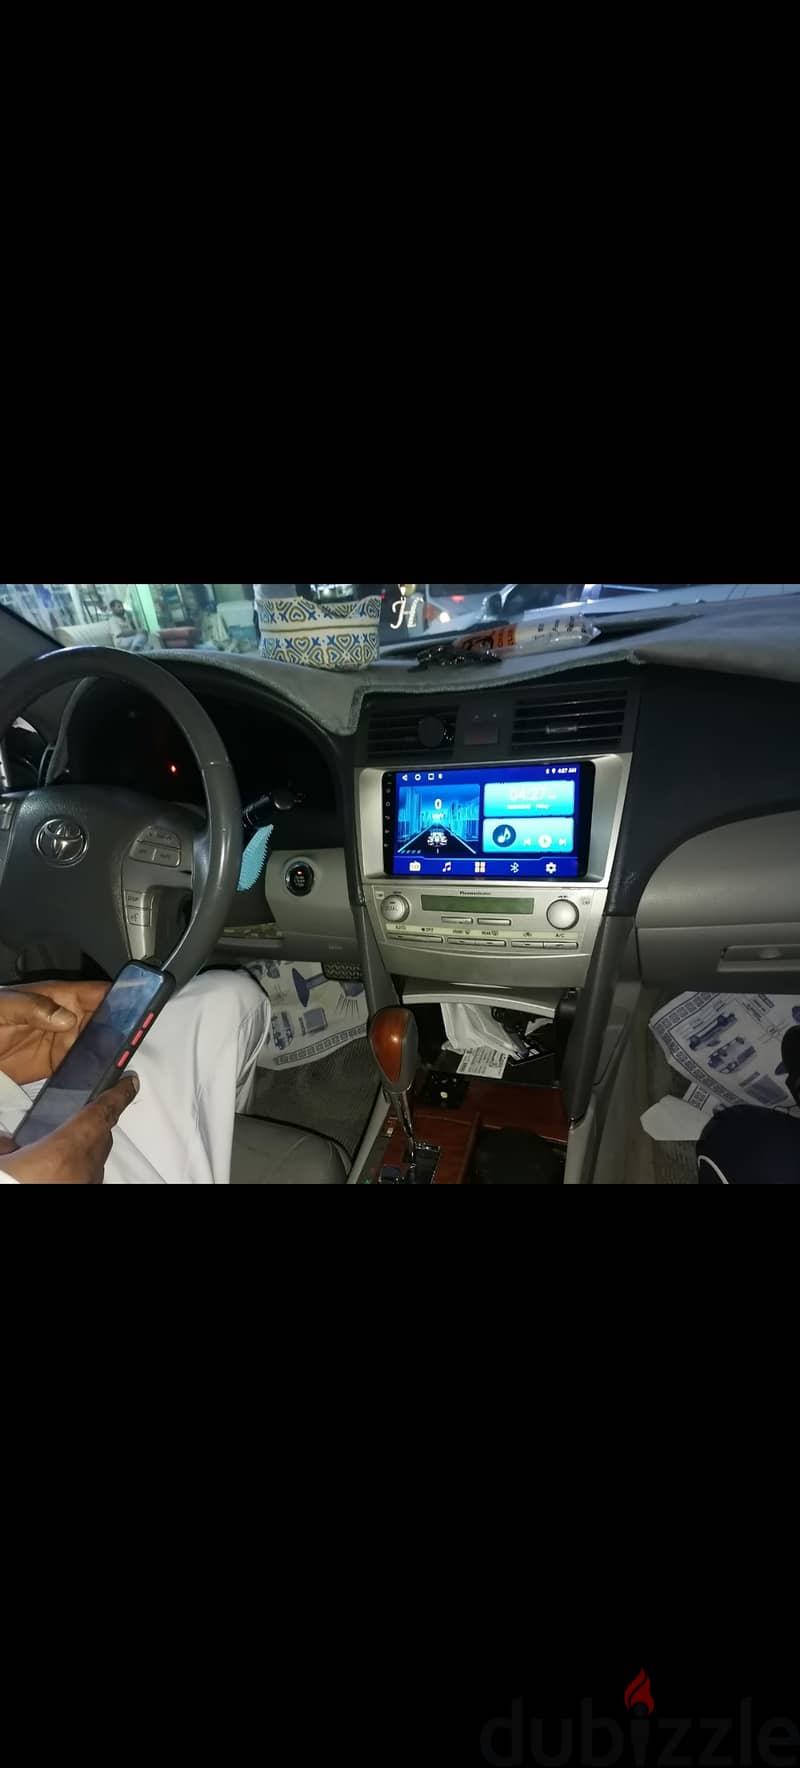 android tablet for car 2